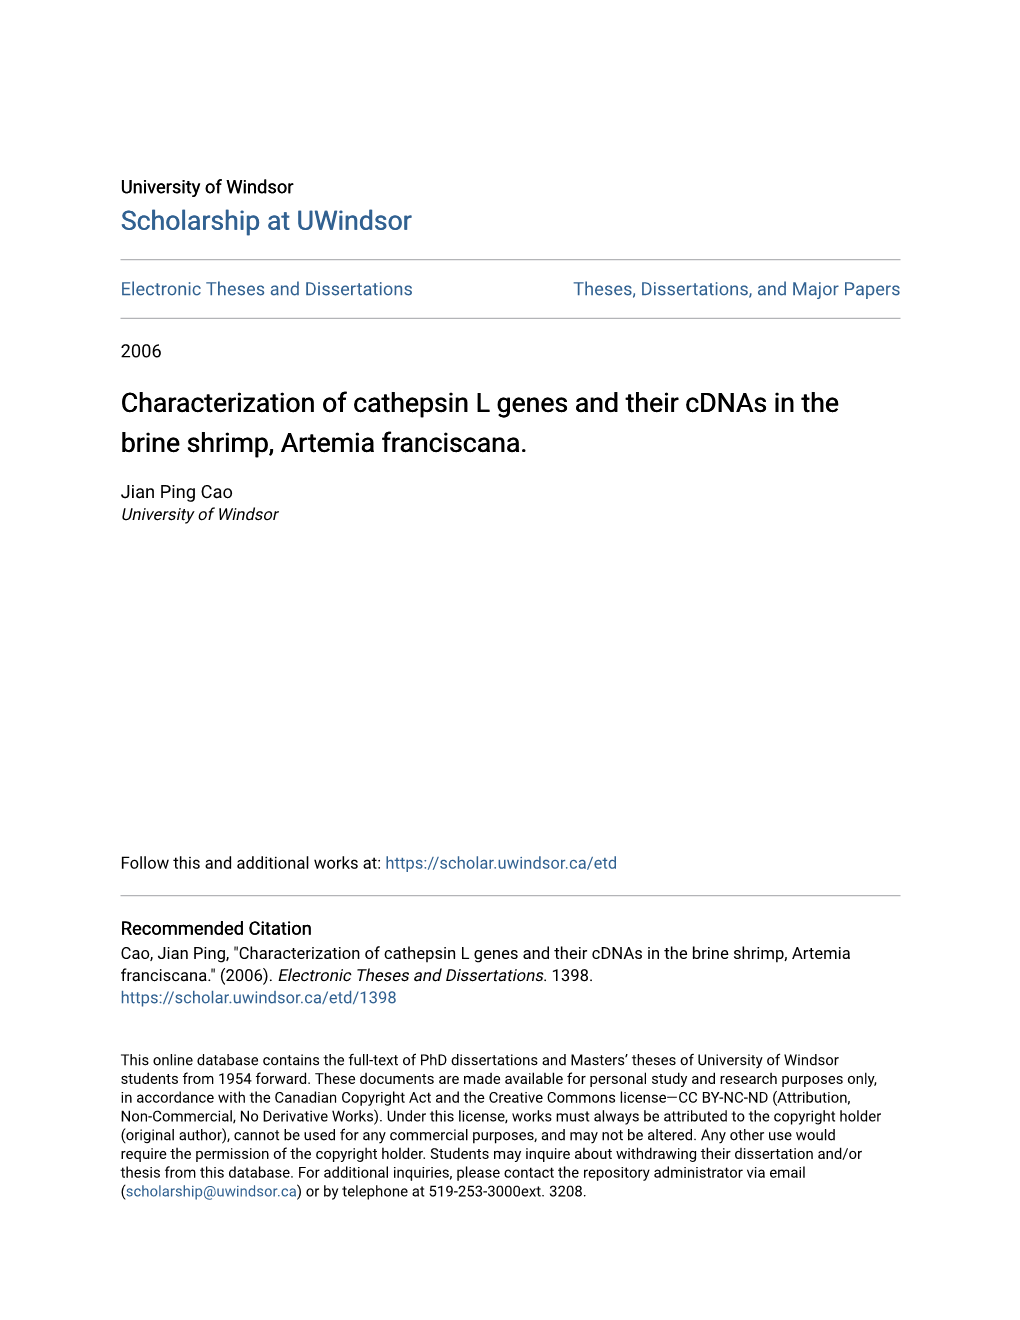 Characterization of Cathepsin L Genes and Their Cdnas in the Brine Shrimp, Artemia Franciscana